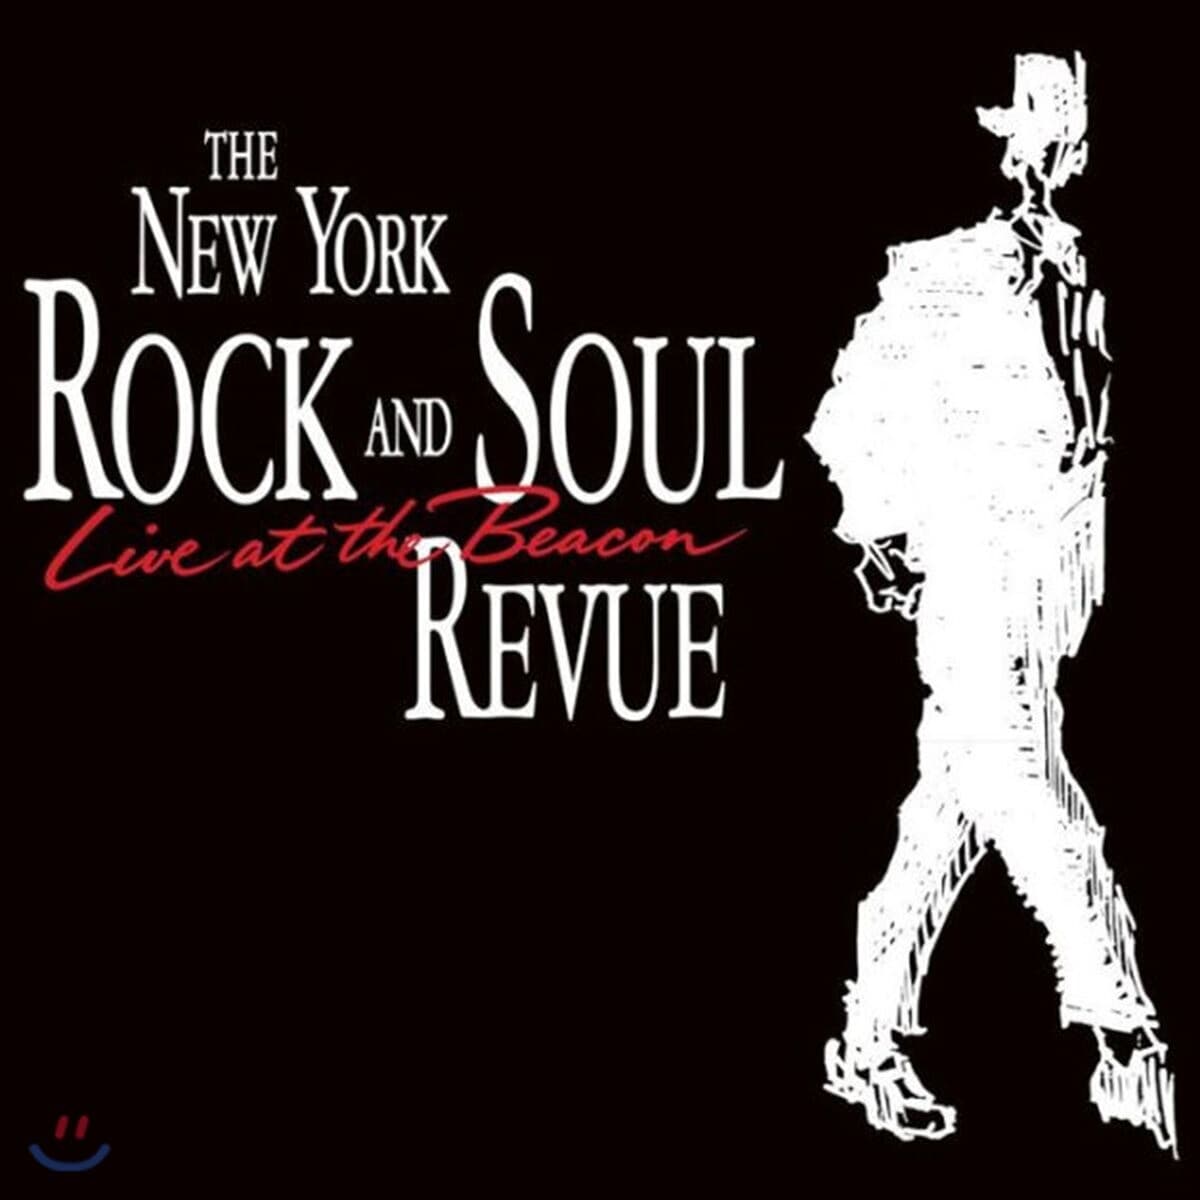 The New York Rock And Soul Revue - Live At The Beacon (일본반)